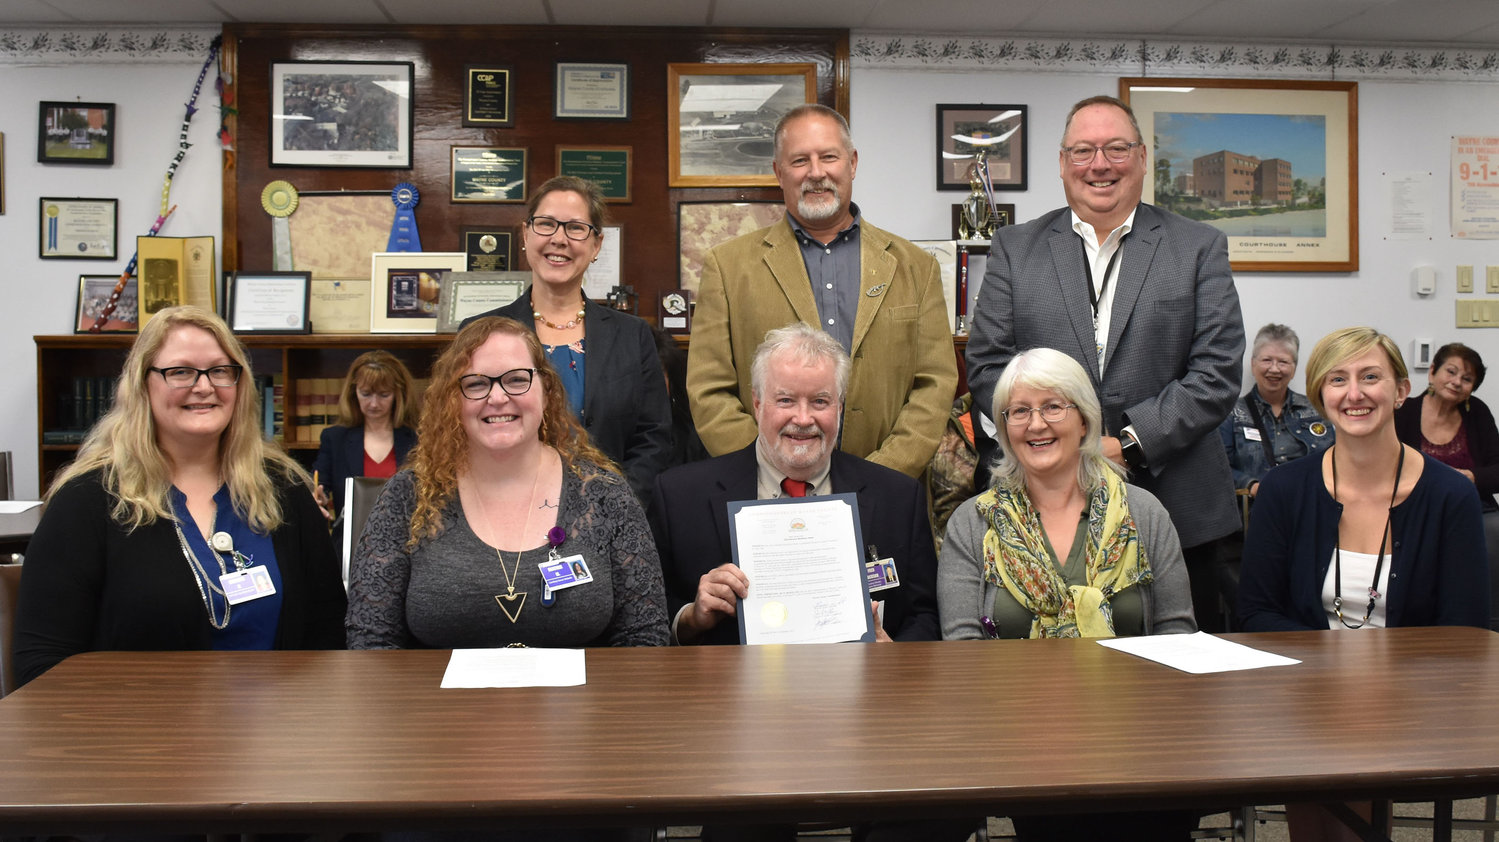 The Wayne County commissioners named the week of October 2 Midwifery Week. Pictured, in front, are: Heather Kellam, left; Heather Mecone; Frederick Jackson; Pat Konzman; and Kara Poremba. In back row are pictured Jocelyn Cramer, left; Brian Smith and Joe Adams.